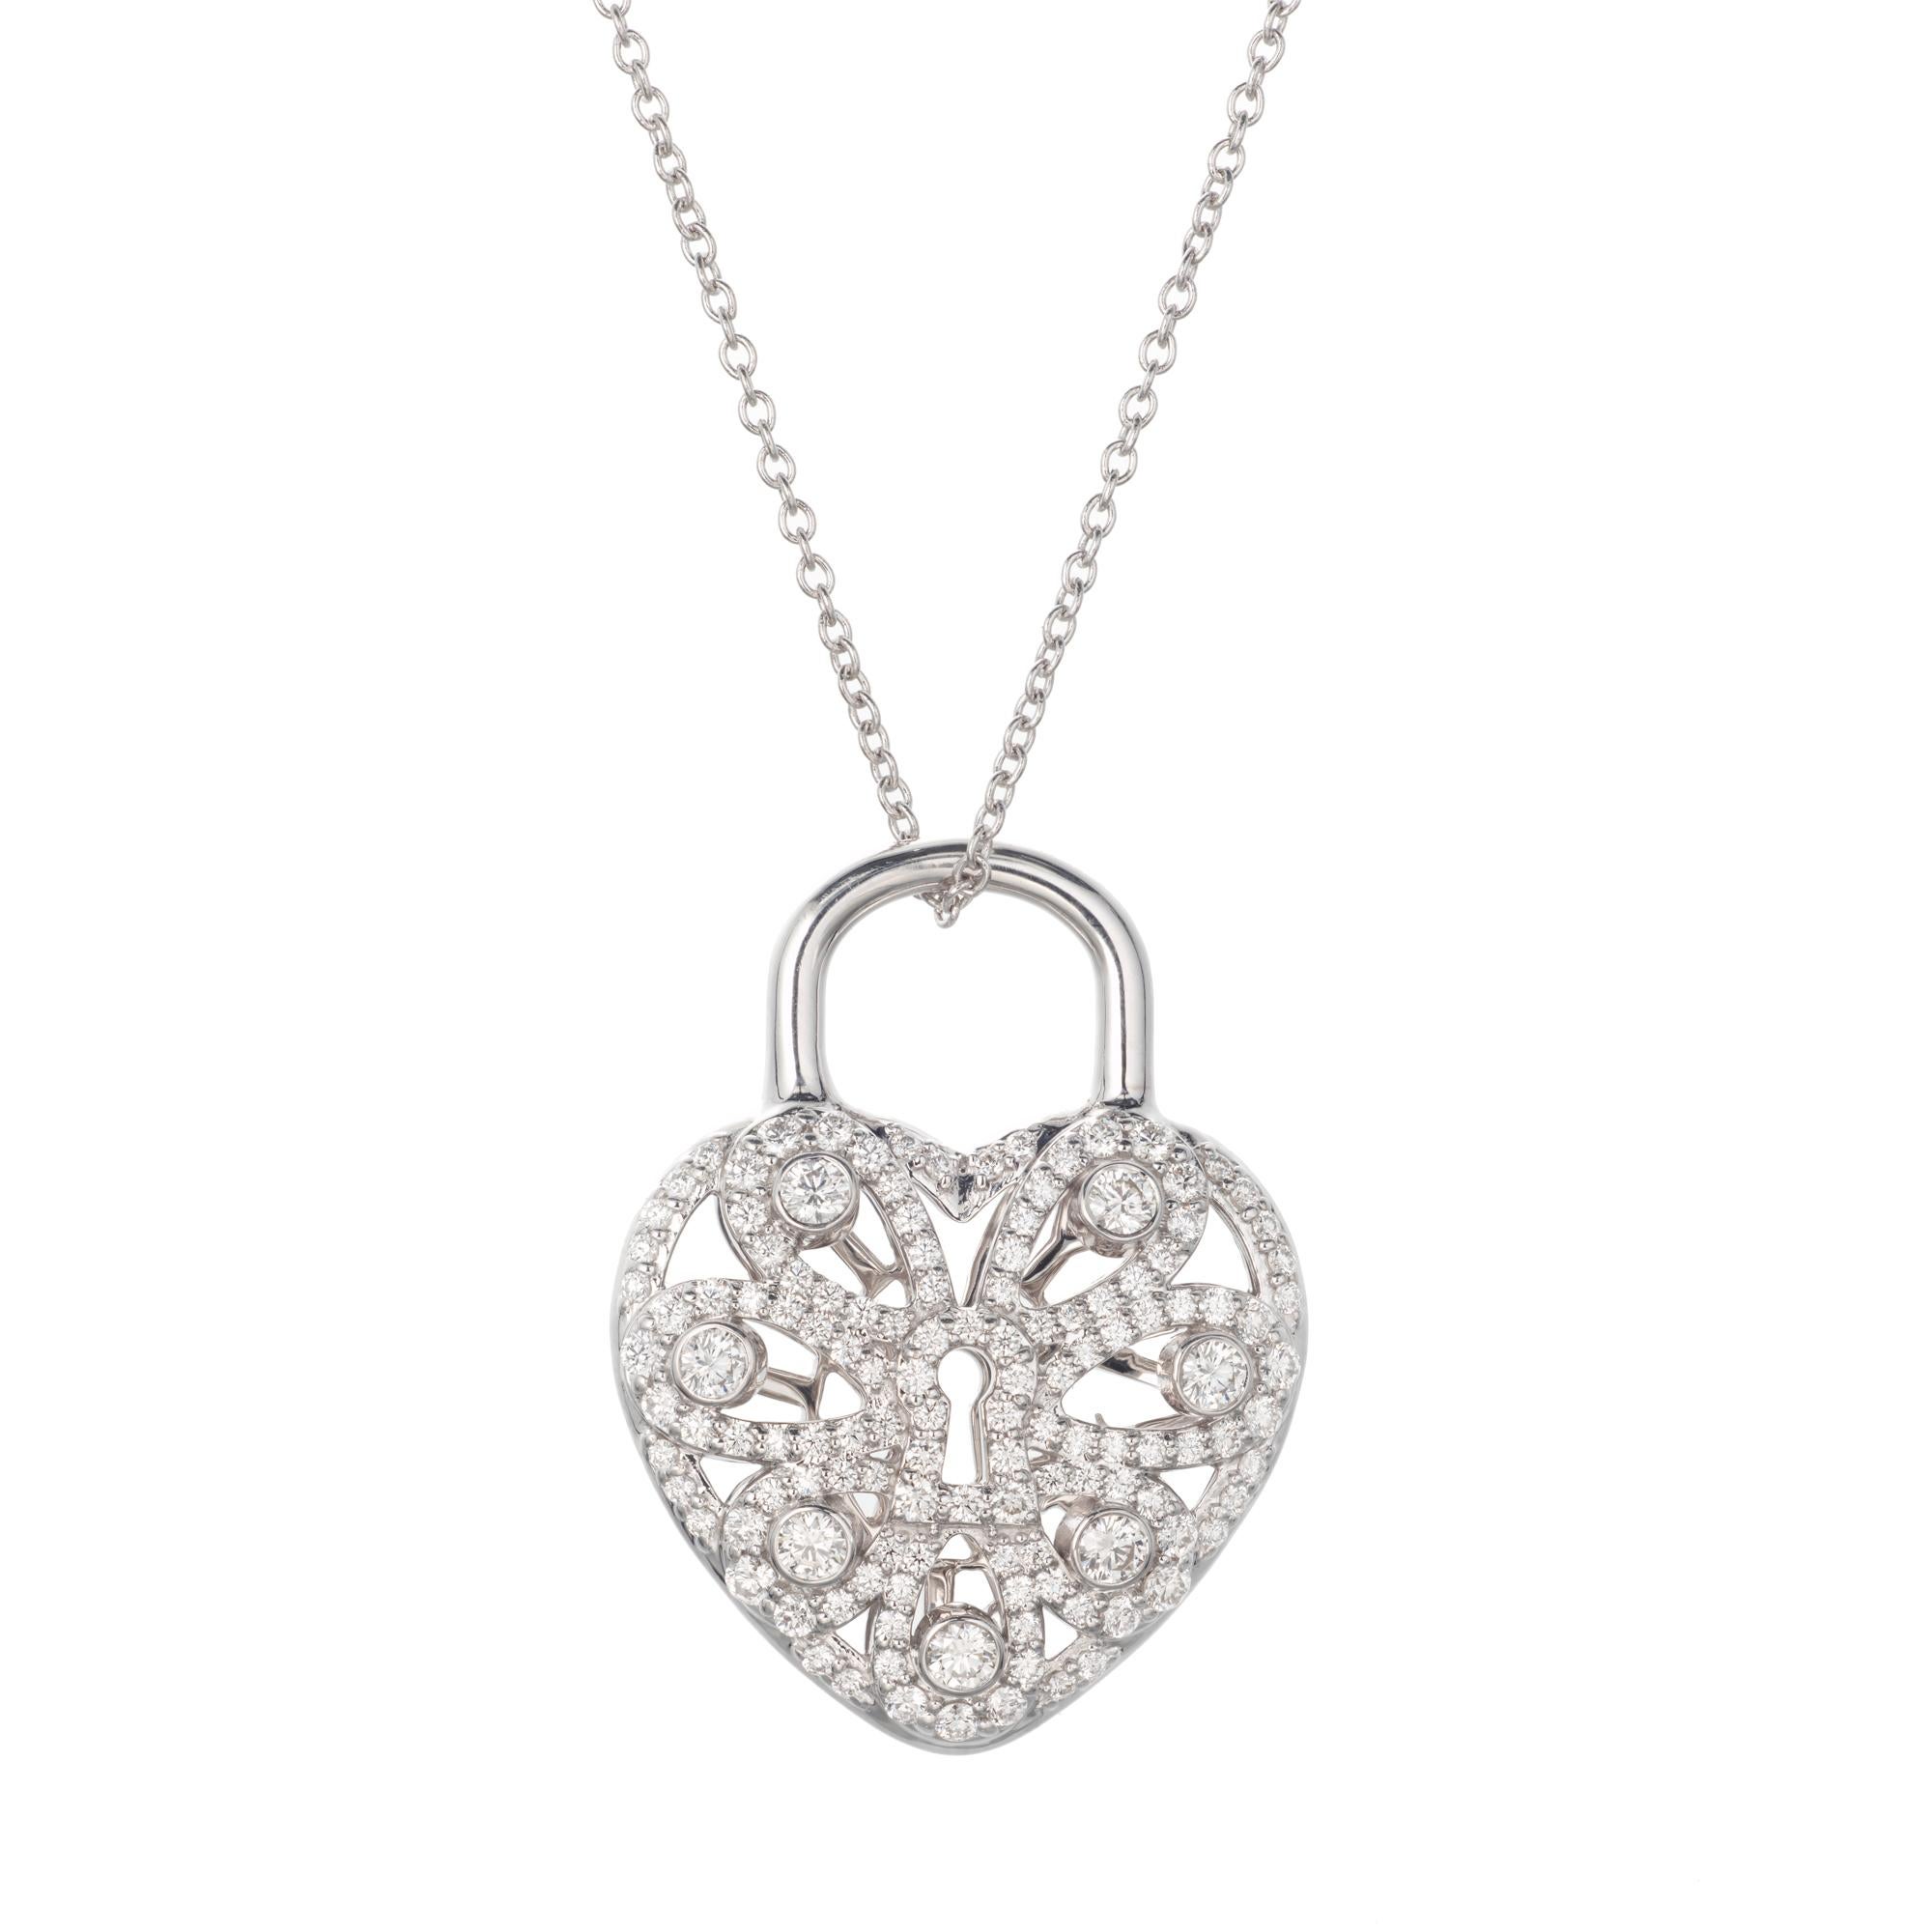 3-D heart pendant with diamond pave front and open work back that spells out TIFFANY.  18 inch white gold chain.

120 full cut round G-H VS diamonds, Approximate .90cts 
18k white gold 
Chain: 18 inches
Stamped: Au 750
Hallmark: Tiffany & co
8.0